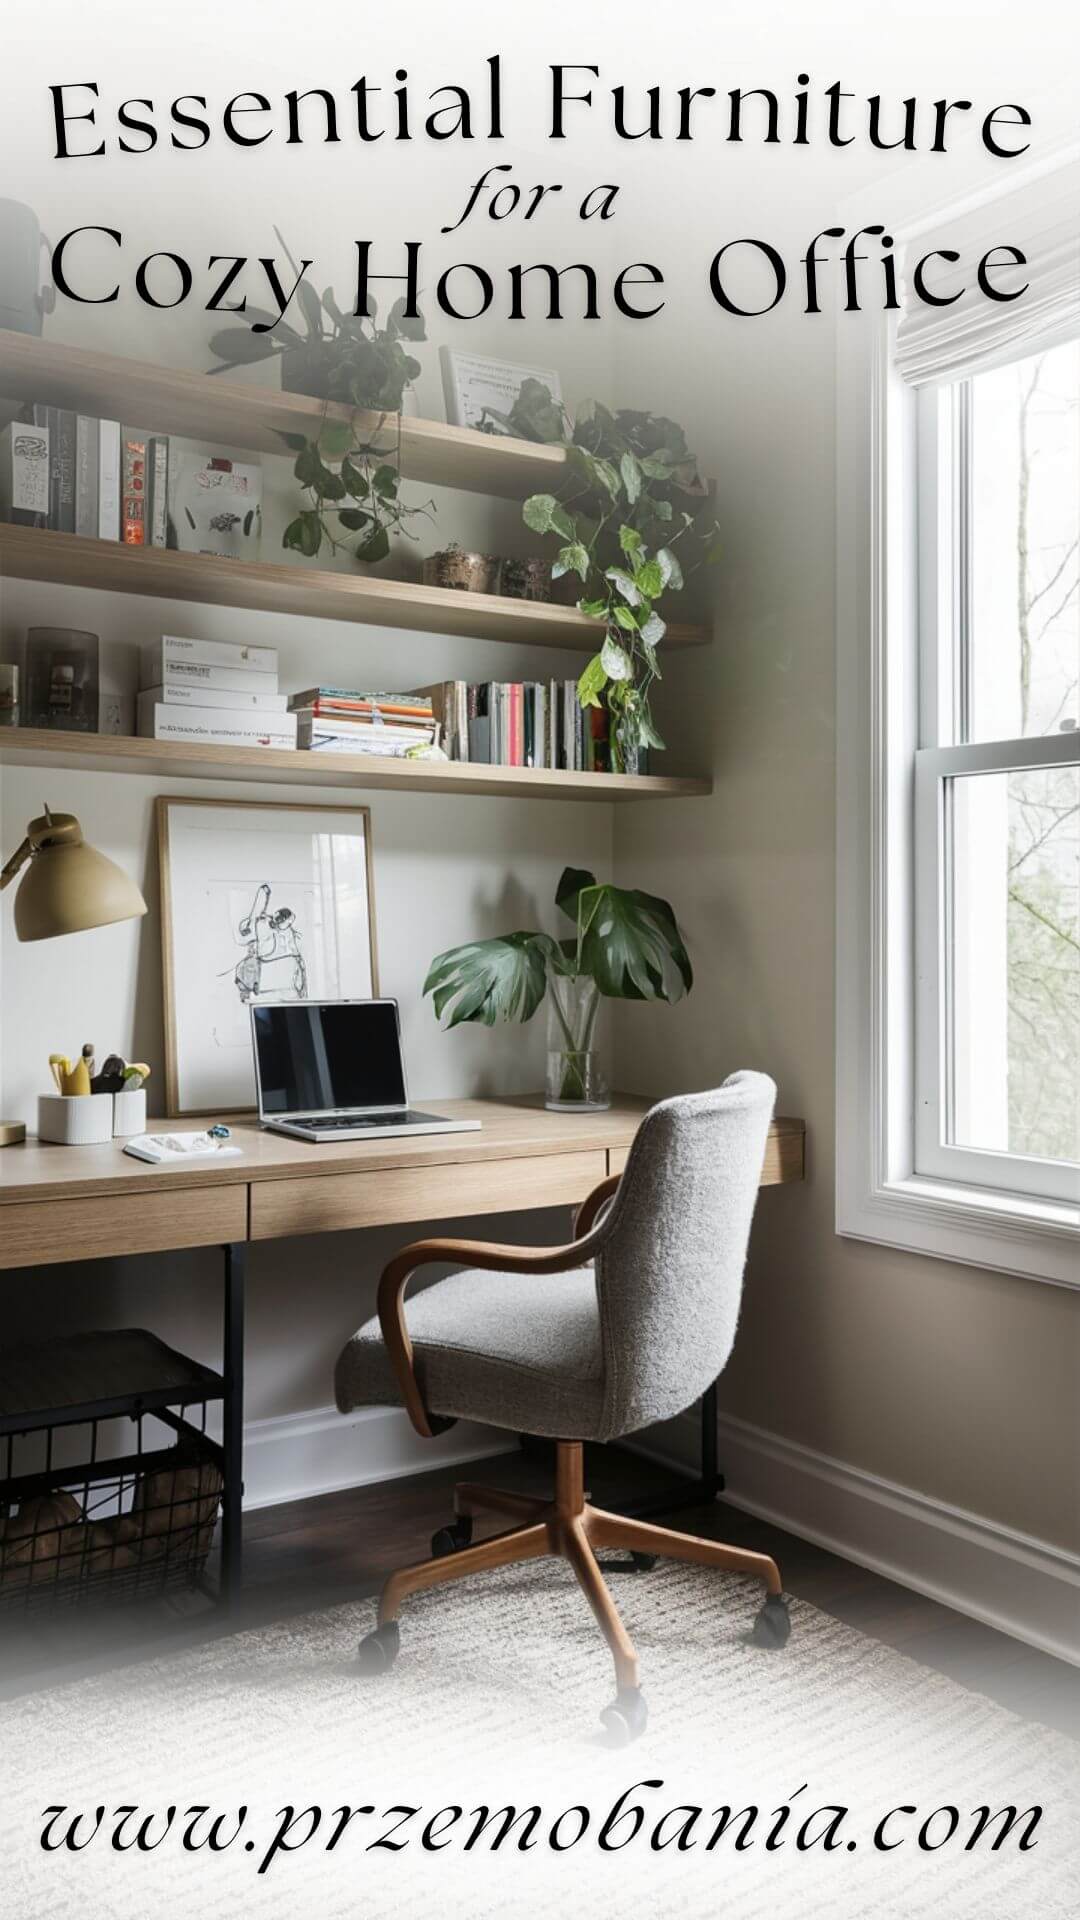 Essential Furniture for a Cozy Home Office 4